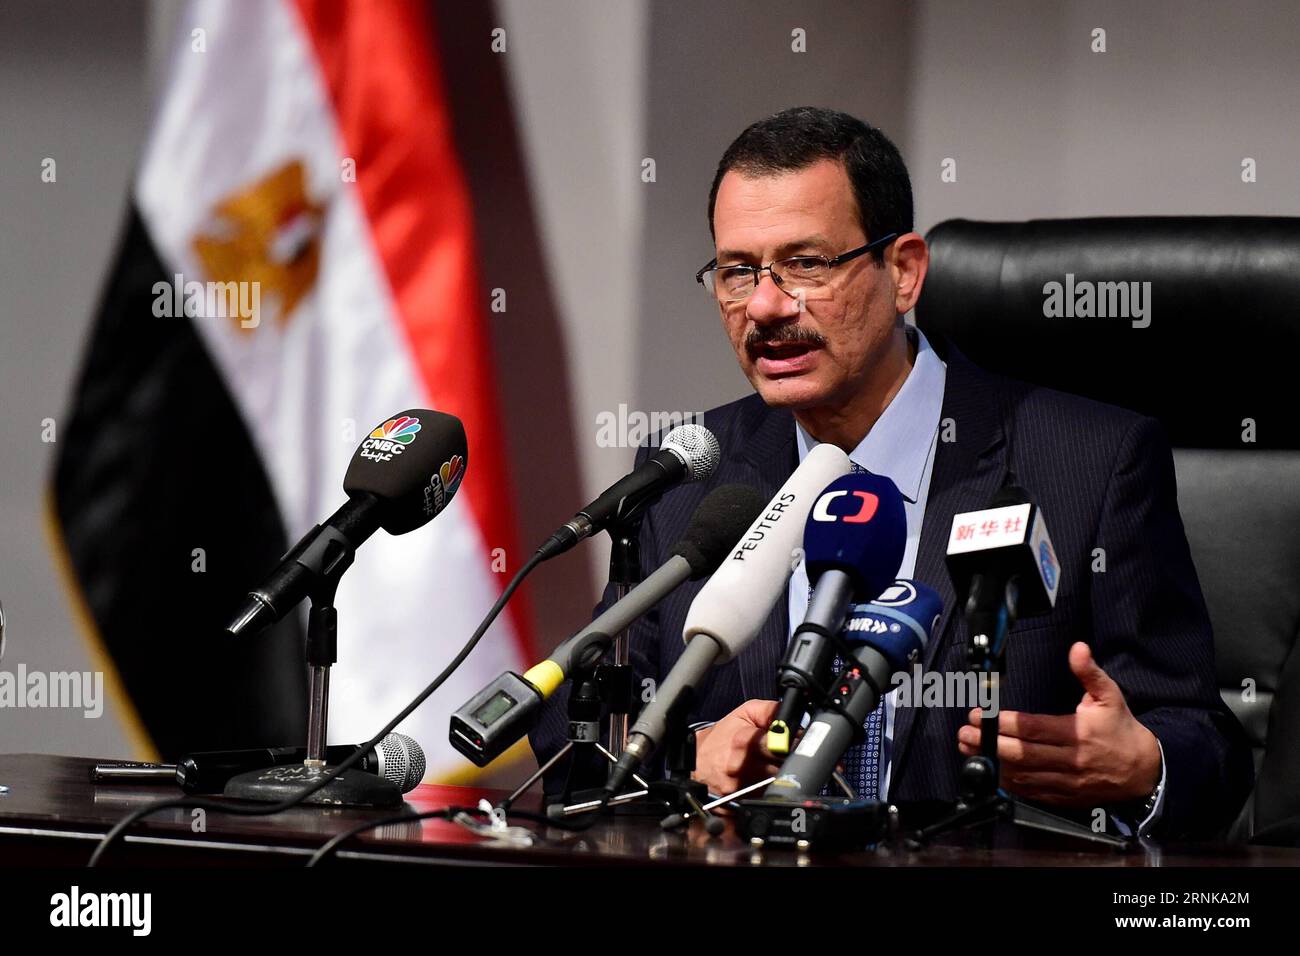 (170316) -- AIN SOKHNA, March 16, 2017 -- Ahmed Darwish, chairman of the Suez Canal Economic Zone (SCZone), introduces the SCZone during a press conference in Ain Sokhna, east of capital Cairo, Egypt on March 13, 2017. China is the largest investor in the development of Egypt s Suez Canal Corridor, a mega project showcasing the win-win partnership between the two countries, said Ahmed Darwish, chairman of the Suez Canal Economic Zone (SCZone), in an interview with Xinhua. Zhao Dingzhe) (zy) EGYPT-AIN SOKHNA-INDUSTRY-SC ZONE-CHINA zhaodingzhe PUBLICATIONxNOTxINxCHN   170316 Ain  March 16 2017 A Stock Photo